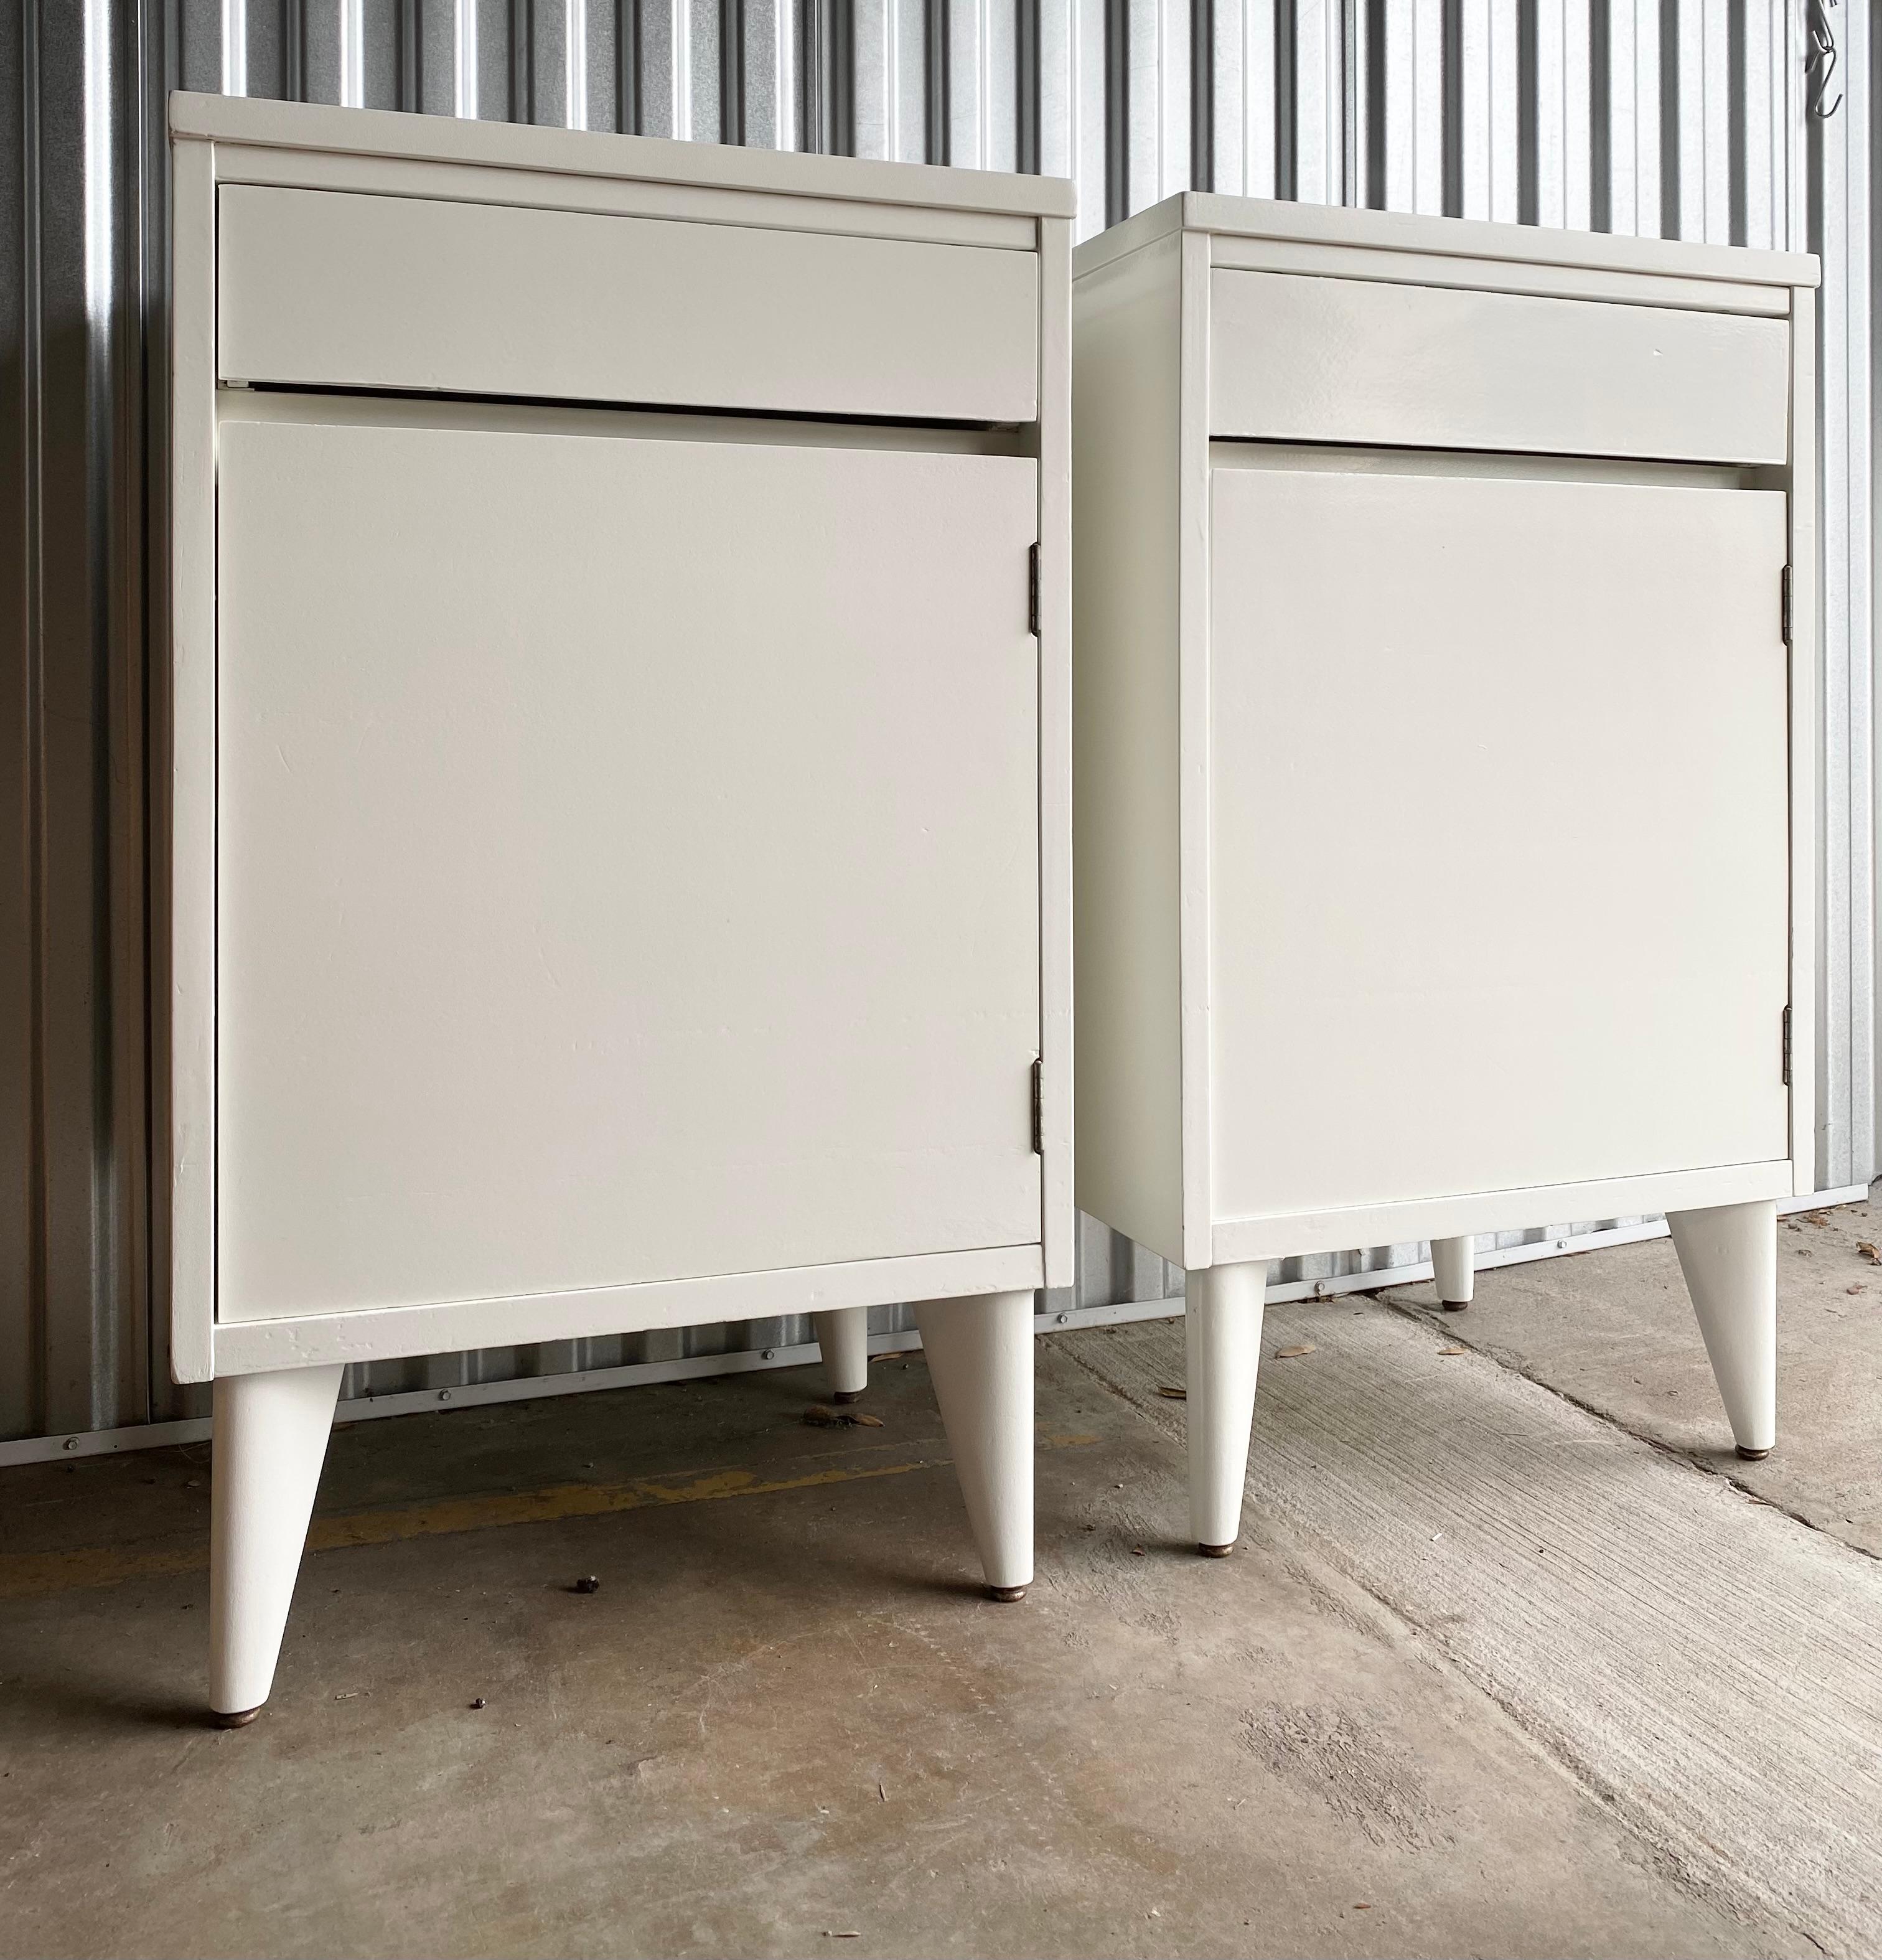 Fabulous pair of professionally painted 1950s nightstands with heavyweight, solid hardwood construction and atomic feet. We selected a glossy alabaster finish for the perfect neutral. It's fresh and bright, yet more sophisticated than a standard